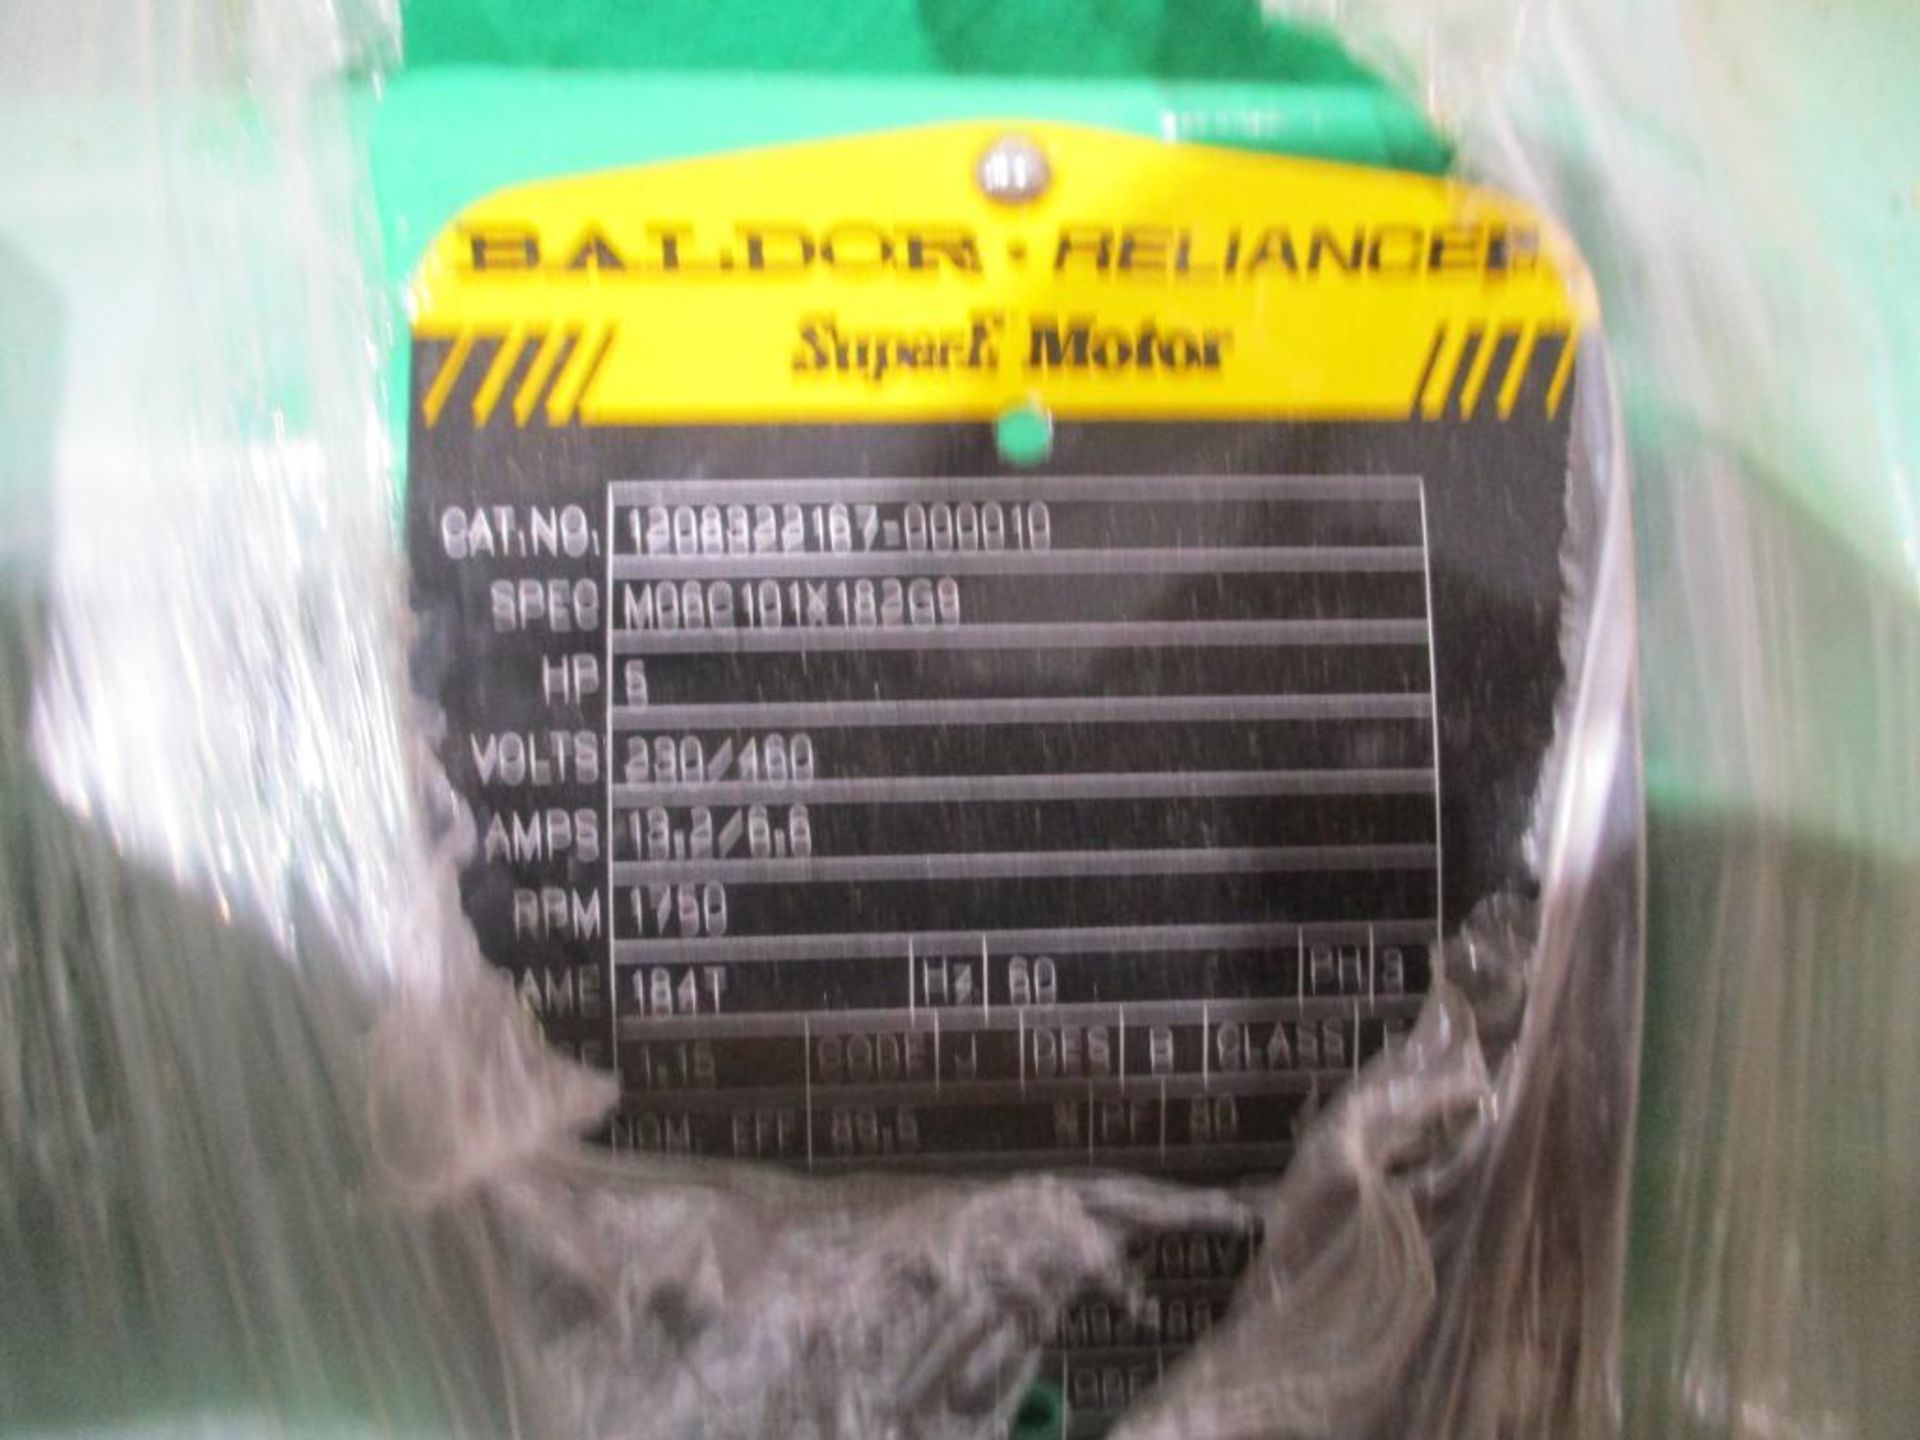 BALDOR 3 PHASE 5HP 1750RPM 184T FRAME A/C MOTOR P/N 1208322167-000010, 105# lbs (There will be a $40 - Bild 4 aus 5